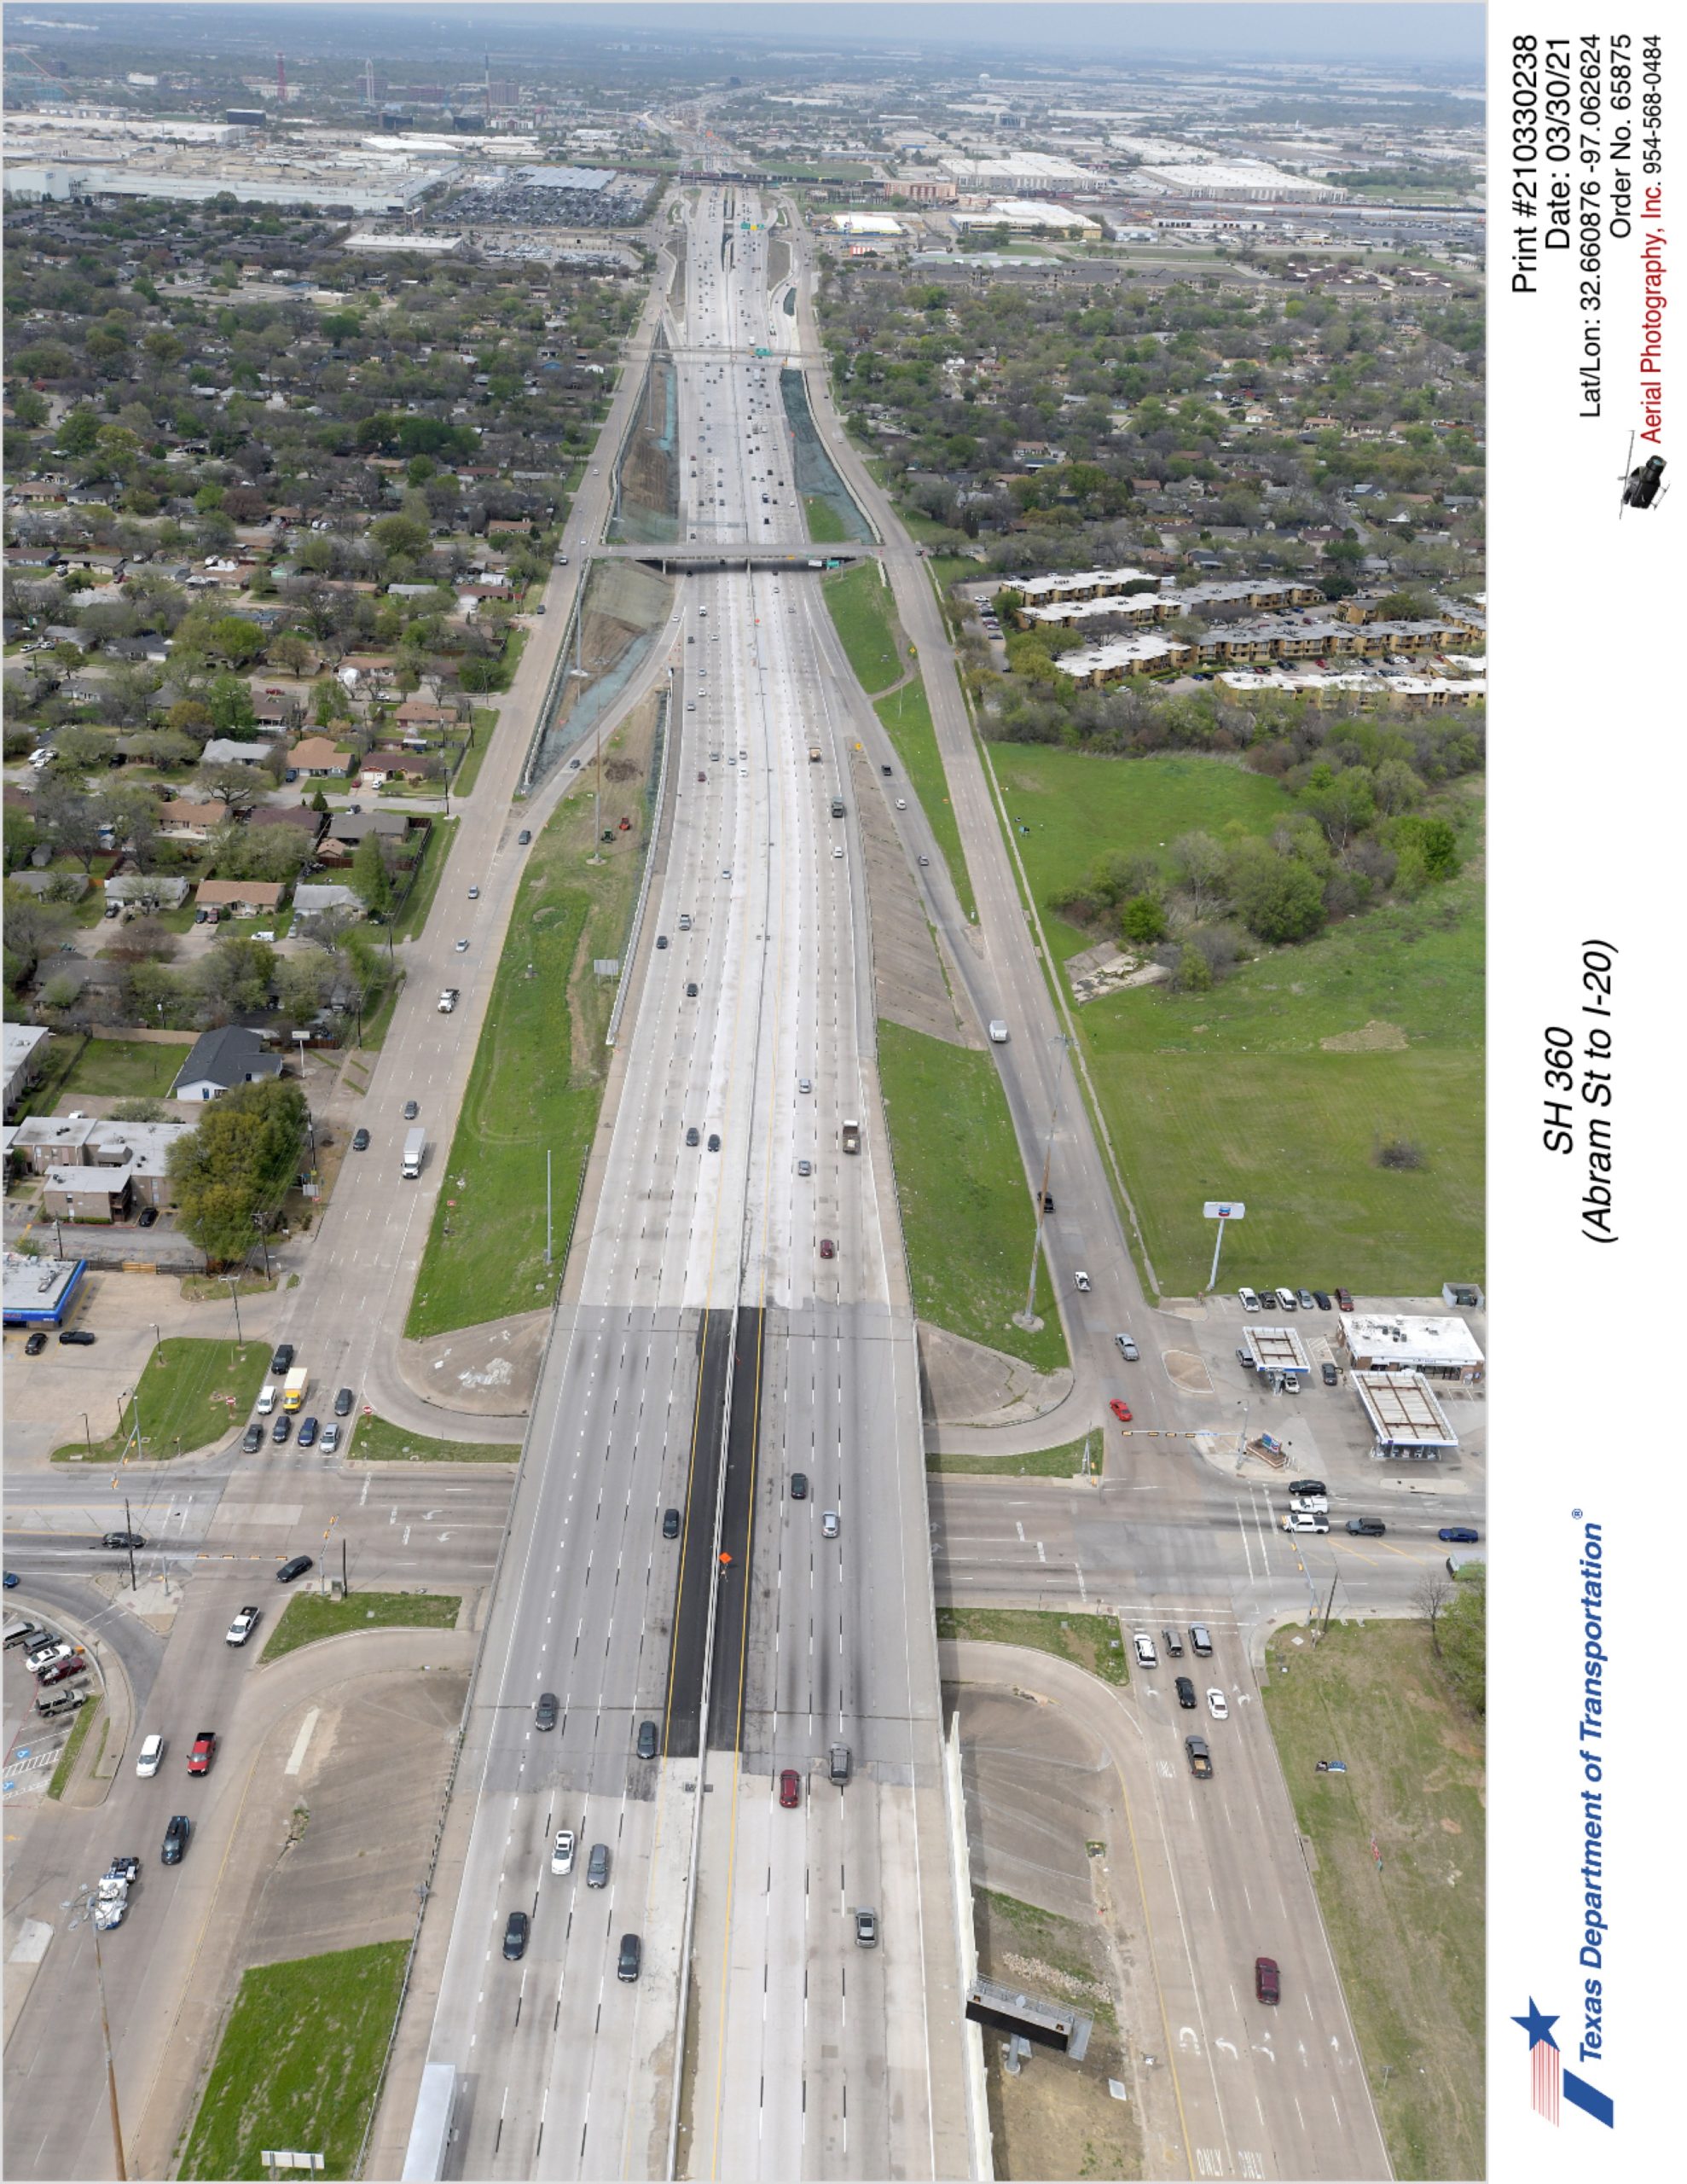 SH 360 looking north over Park Row Dr interchange. Completed interior lane in use.